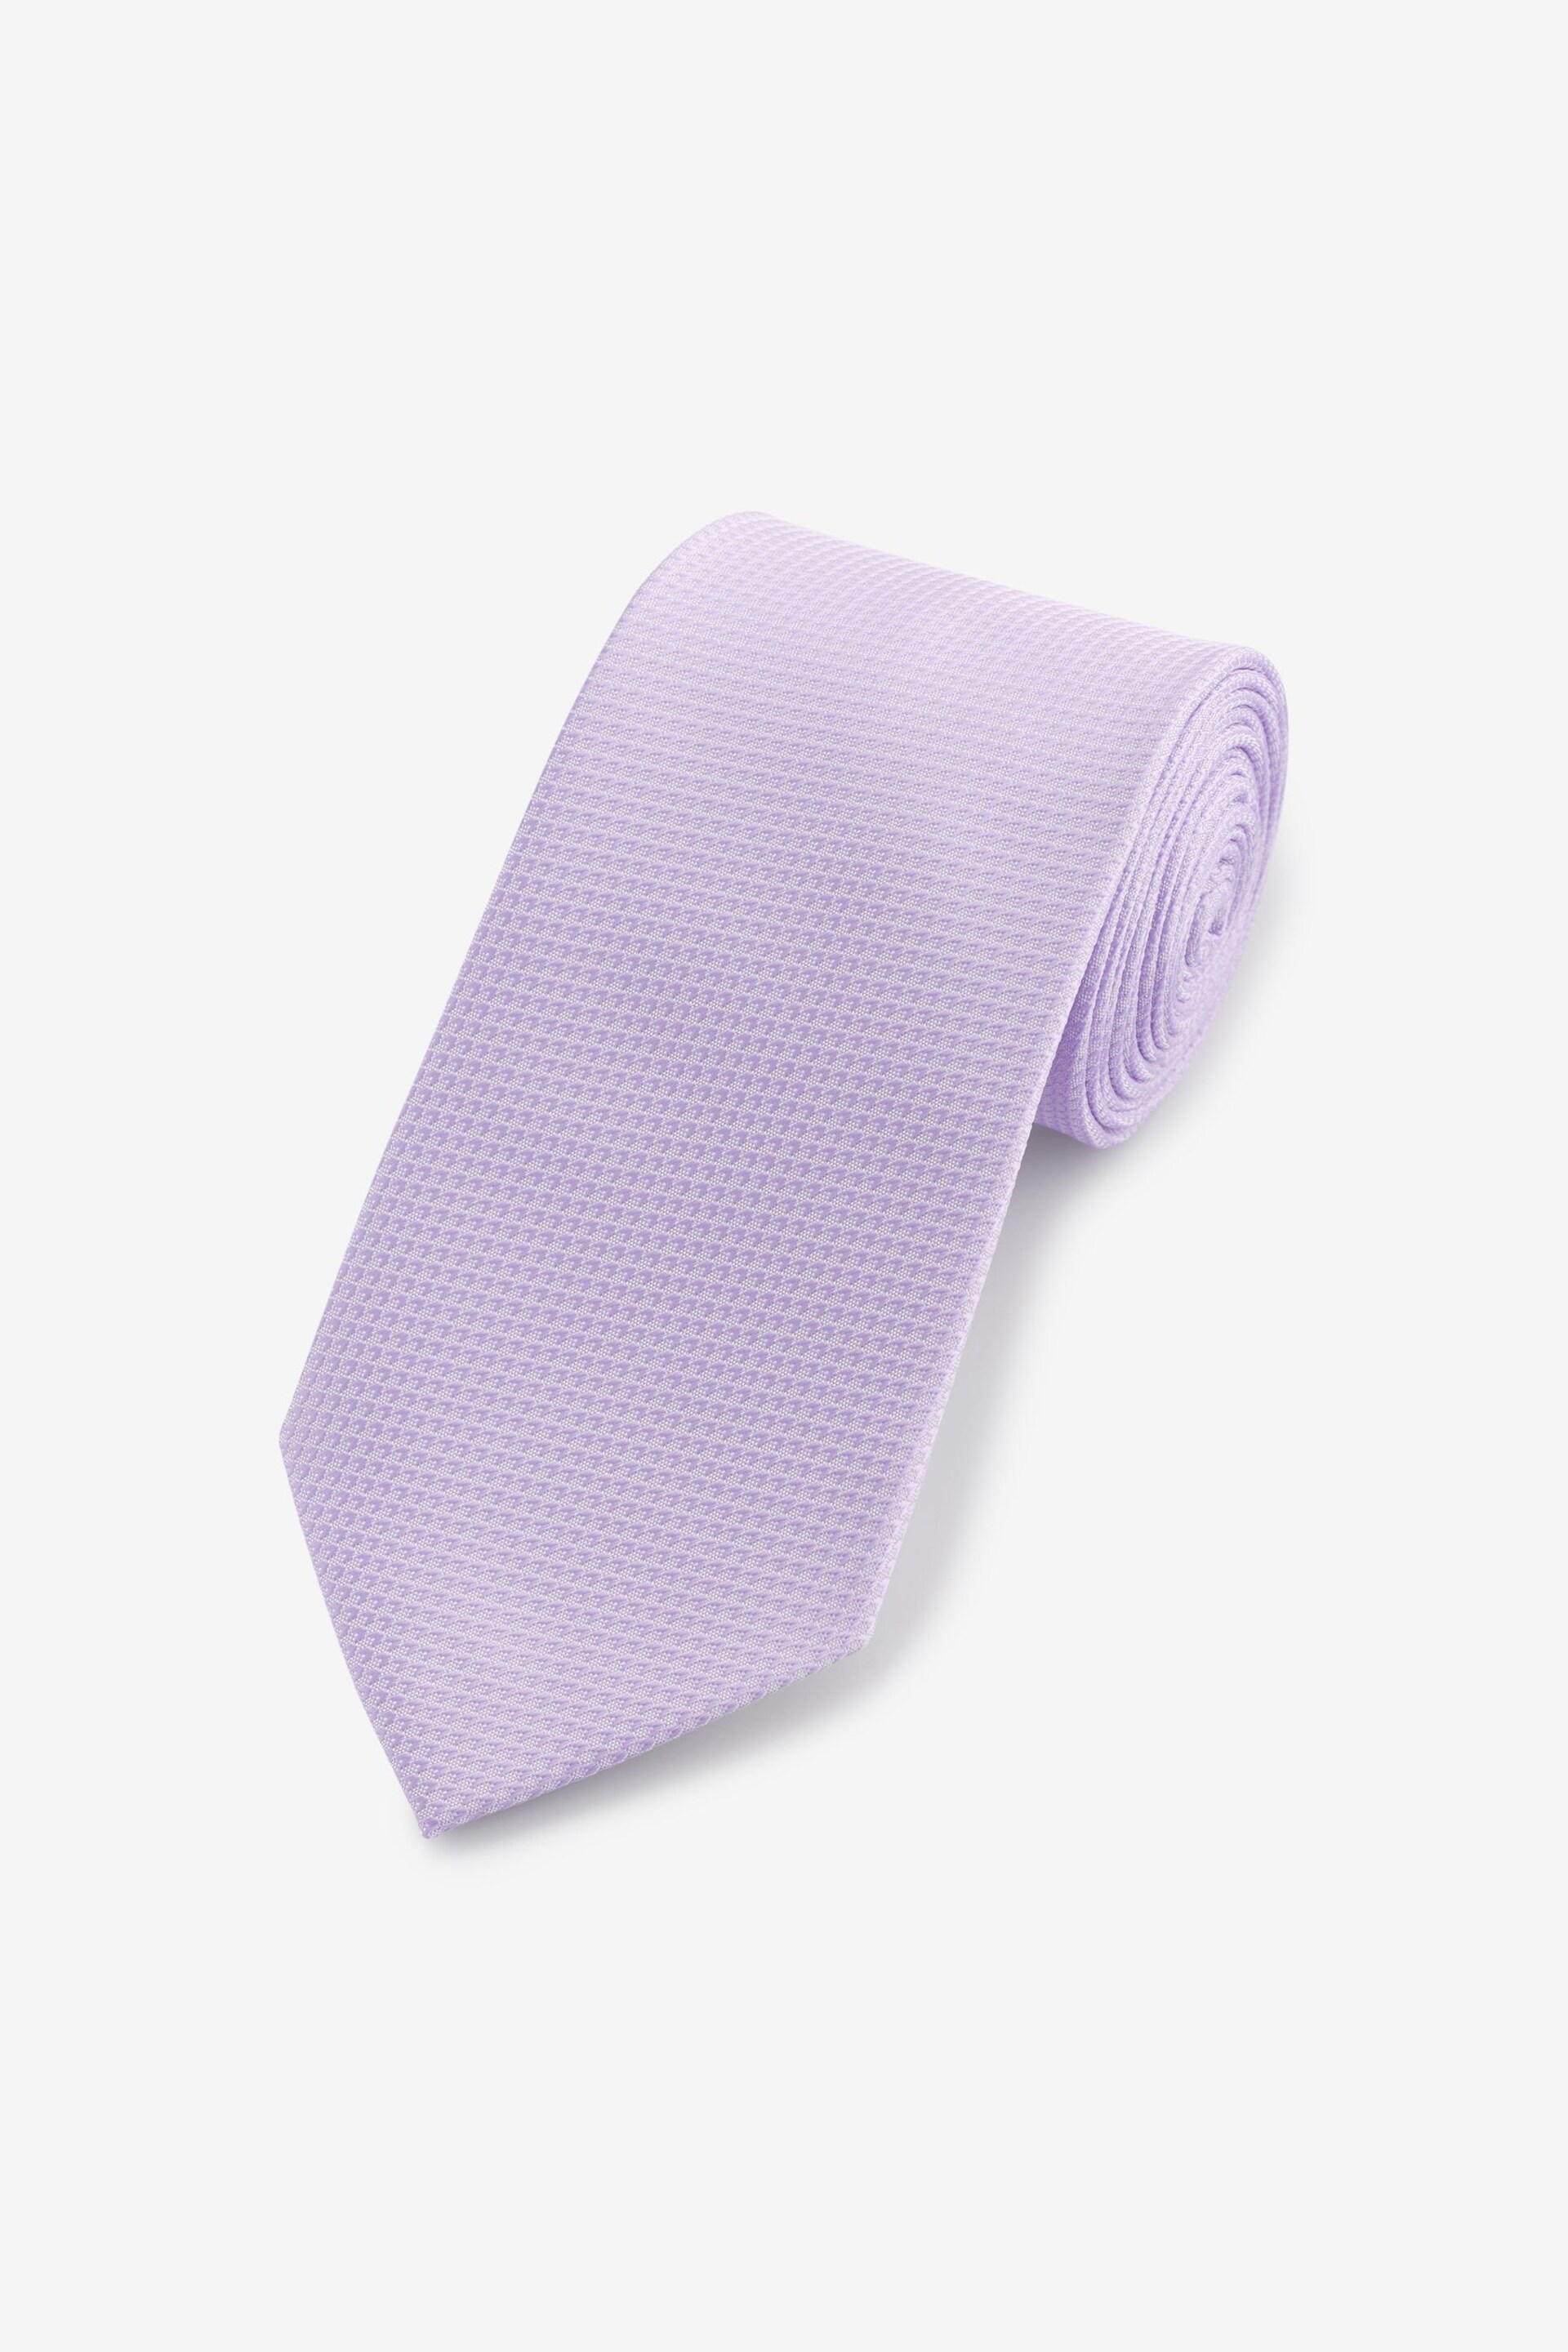 Lilac Purple Textured Tie - Image 1 of 3